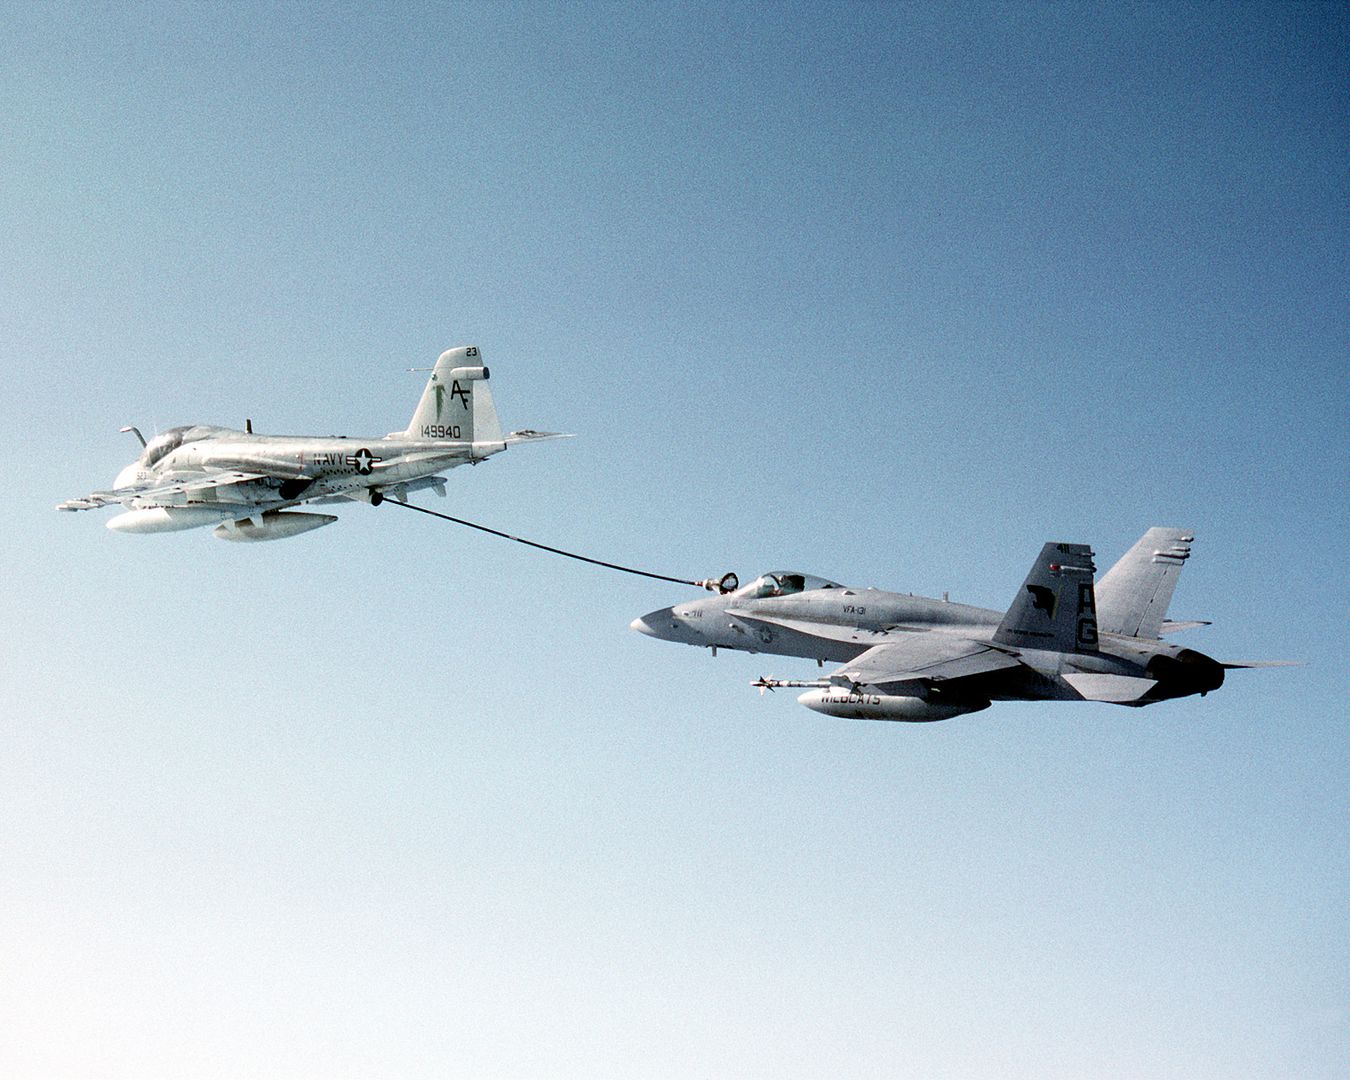 Strike Fighter Squadron 131 FA 18C Hornet Aircraft Refueling From A KA 6D Intruder Aircraft